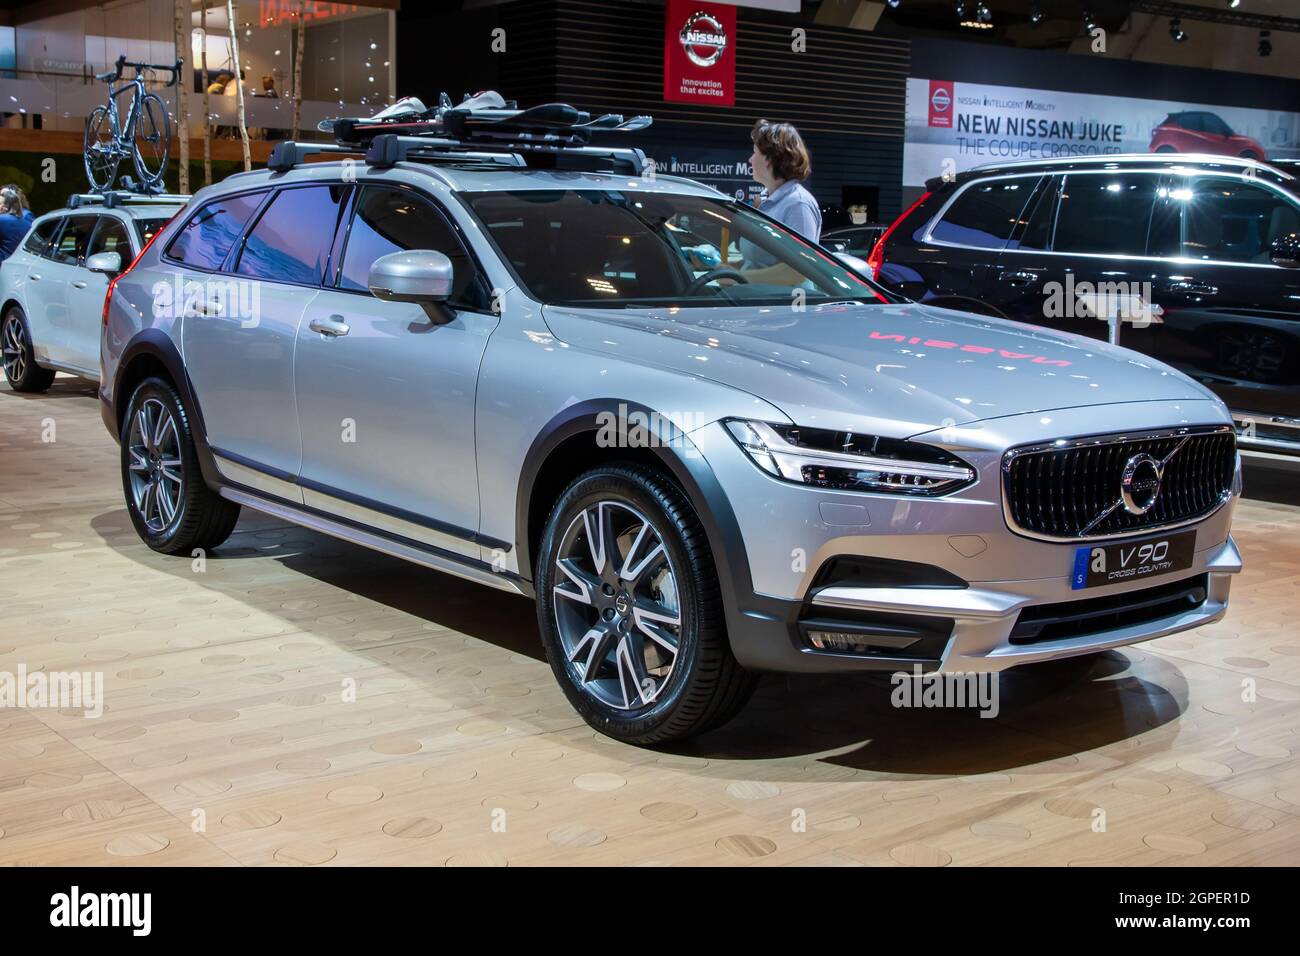 Volvo V90 Cross Country car model shown at the Autosalon 2020 Motor Show. Brussels, Belgium - January 9, 2020. Stock Photo